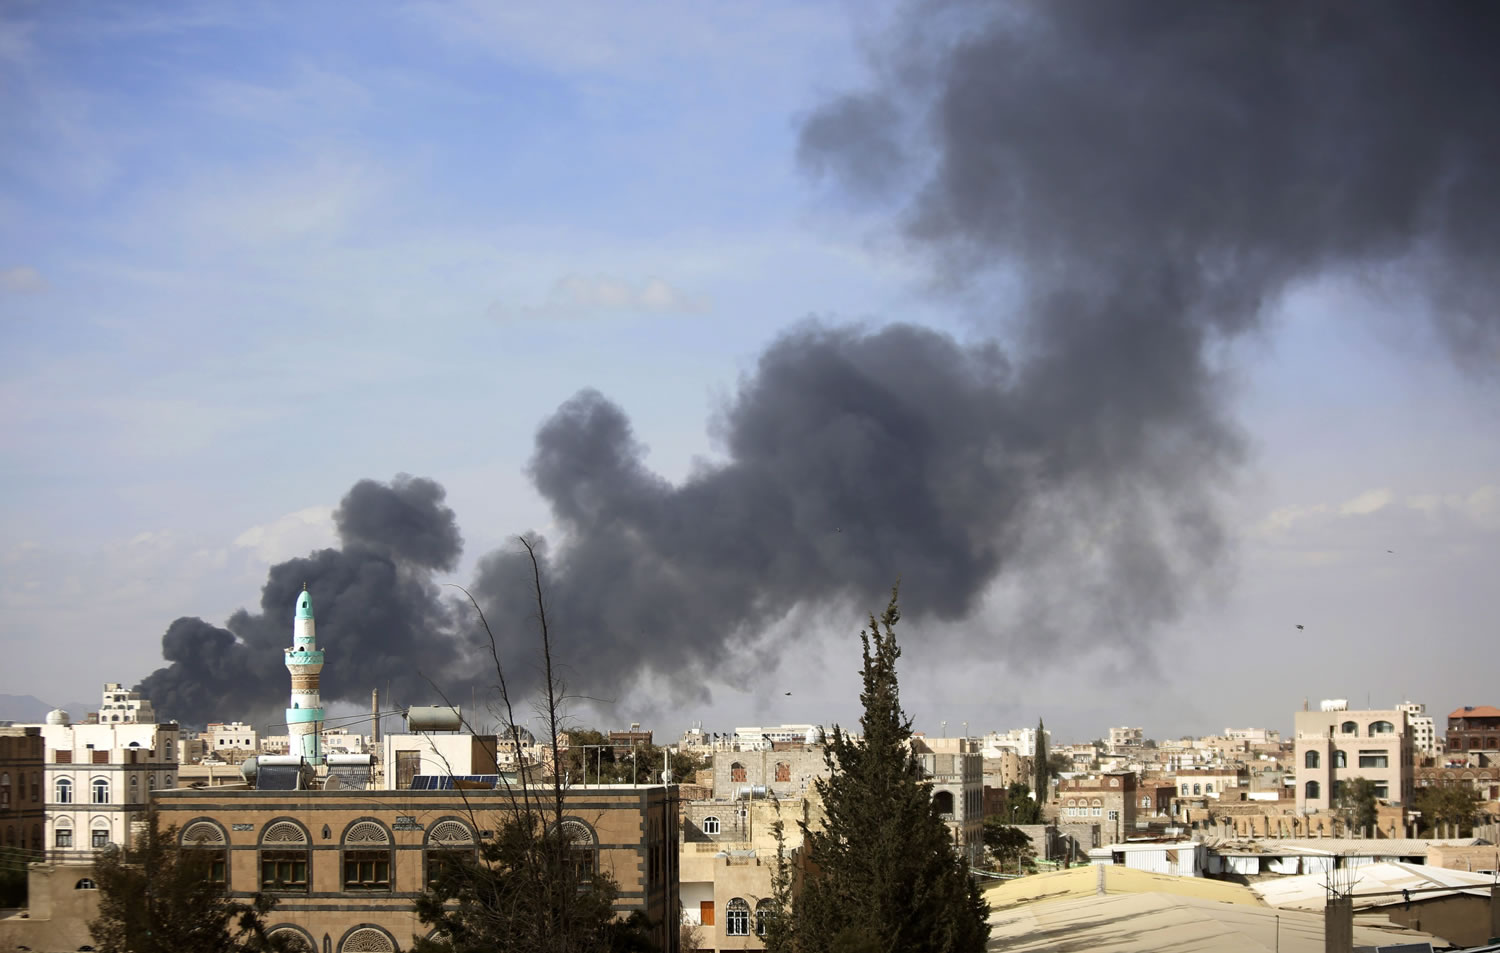 Smoke rises Saturday after Saudi-led airstrikes hit a site in Sanaa, Yemen. Airstrikes by the Saudi-led coalition targeting Yemen&#039;s Shiite rebels killed more than 32 people overnight including at least eight civilians in the capital, Sanaa, officials said Saturday.